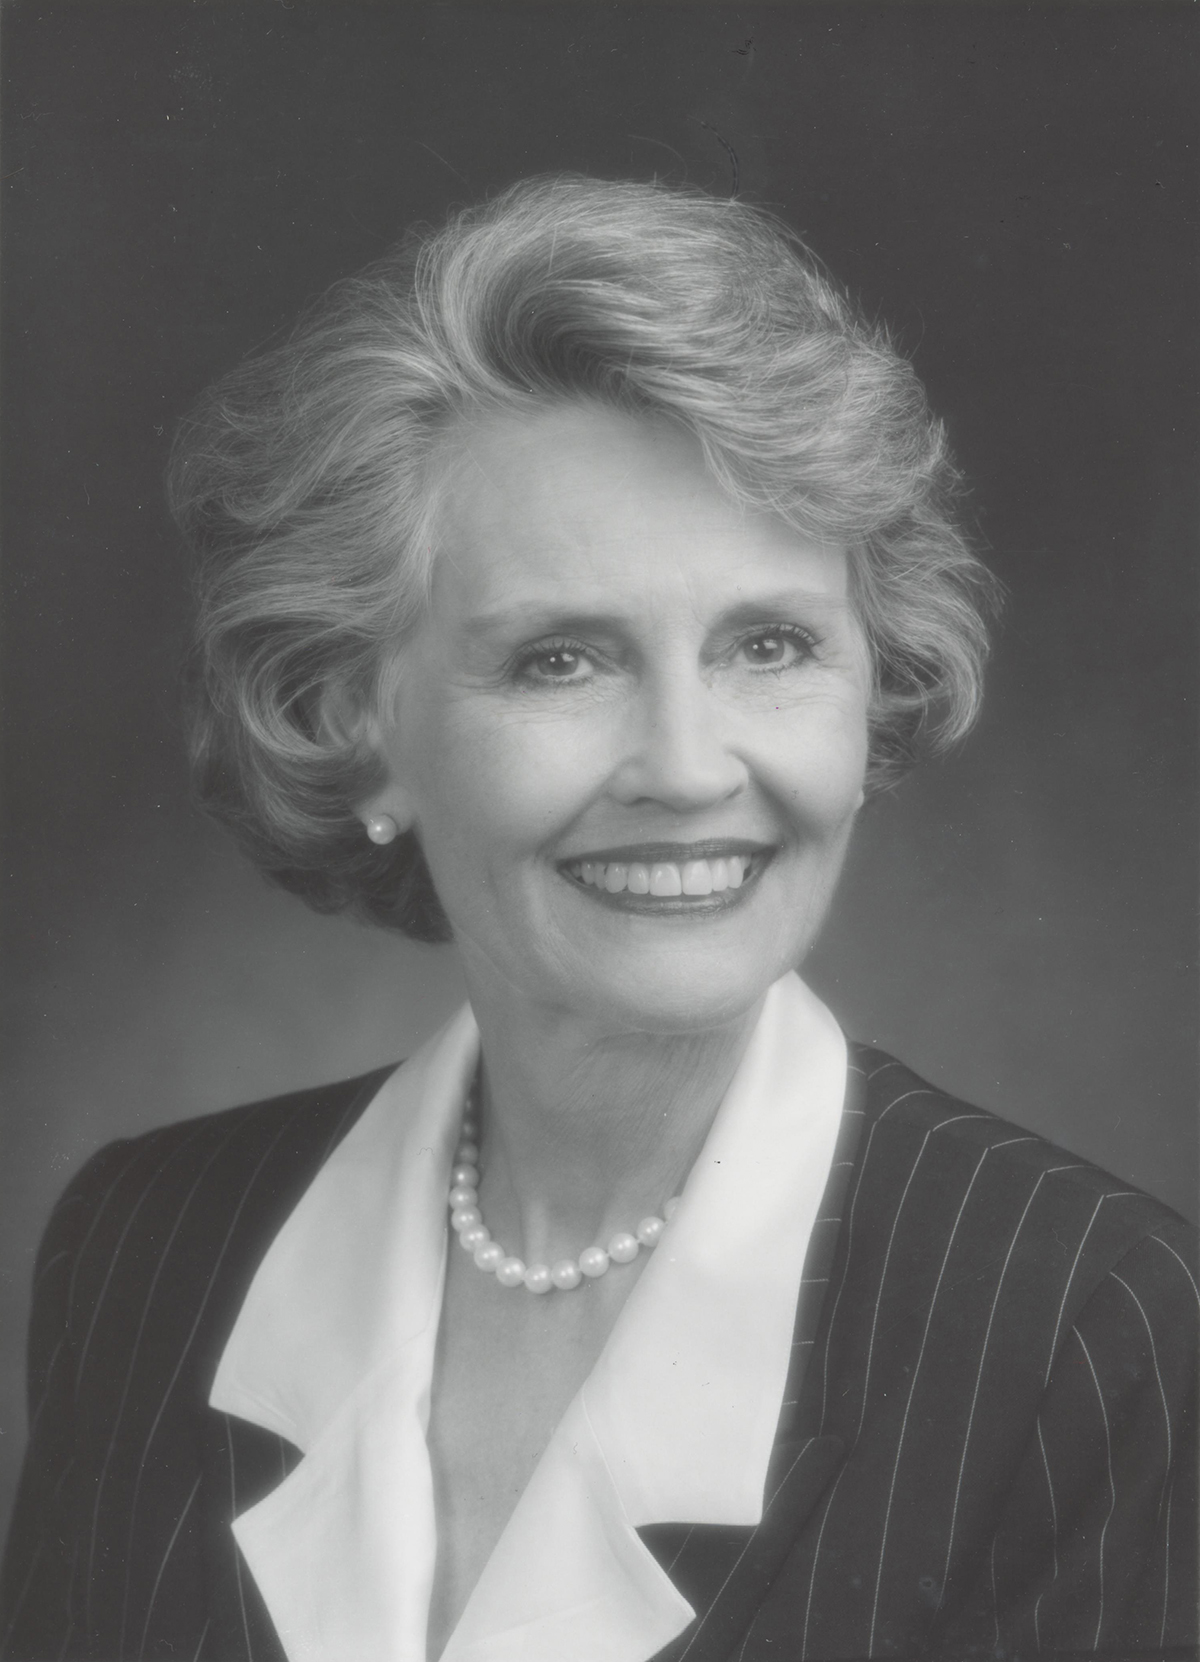 Emeritus Trustee Ann M. Jones (active March 1988-April 2011), b. July 29, 1935– d. Jan. 21, 2019. Jones and her husband Jon Rex Jones funded the Ann M. Jones Endowed Chair of Special Education. 1997 portrait photo, courtesy of TCU Office of the Chancellor and the family of Ann M. Jones